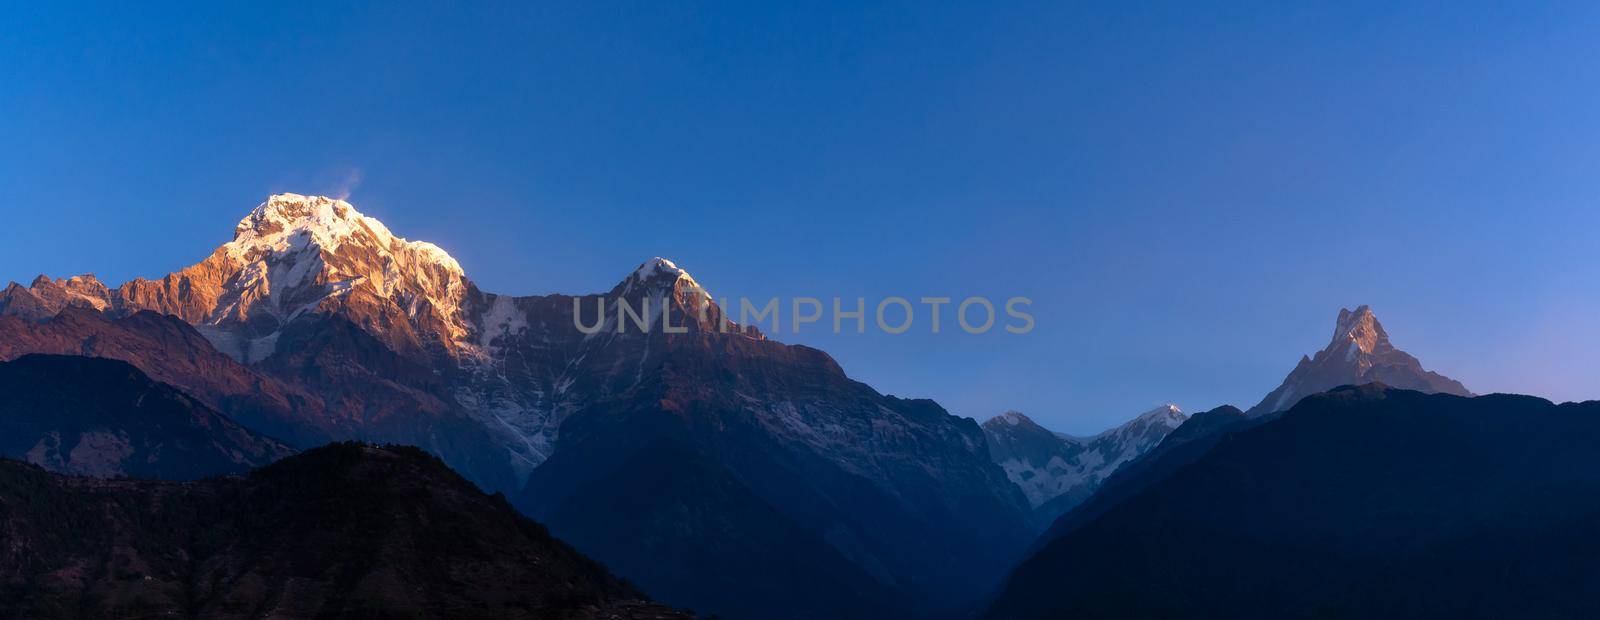 Panorama nature view of Himalayan mountain range with clear blue sky at Nepal by Nuamfolio